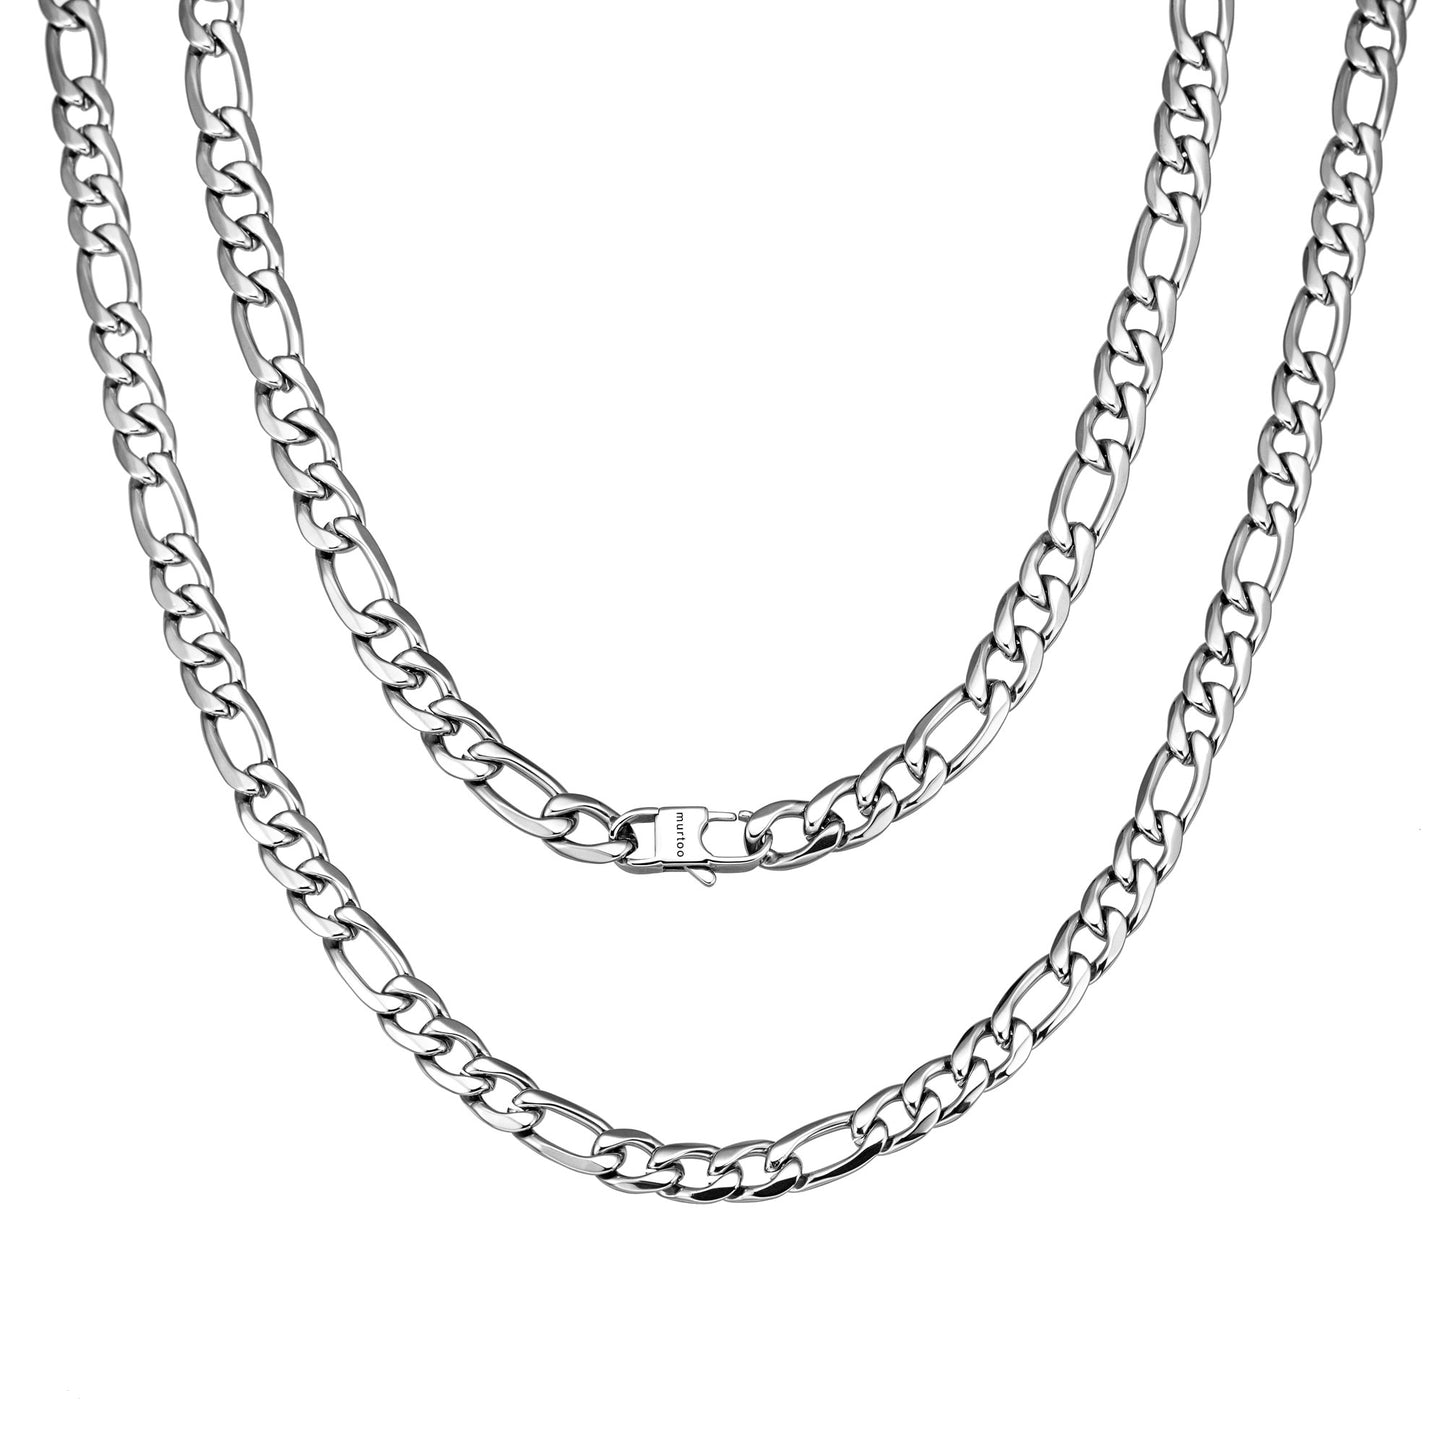 10mm steel Necklace NHR00086